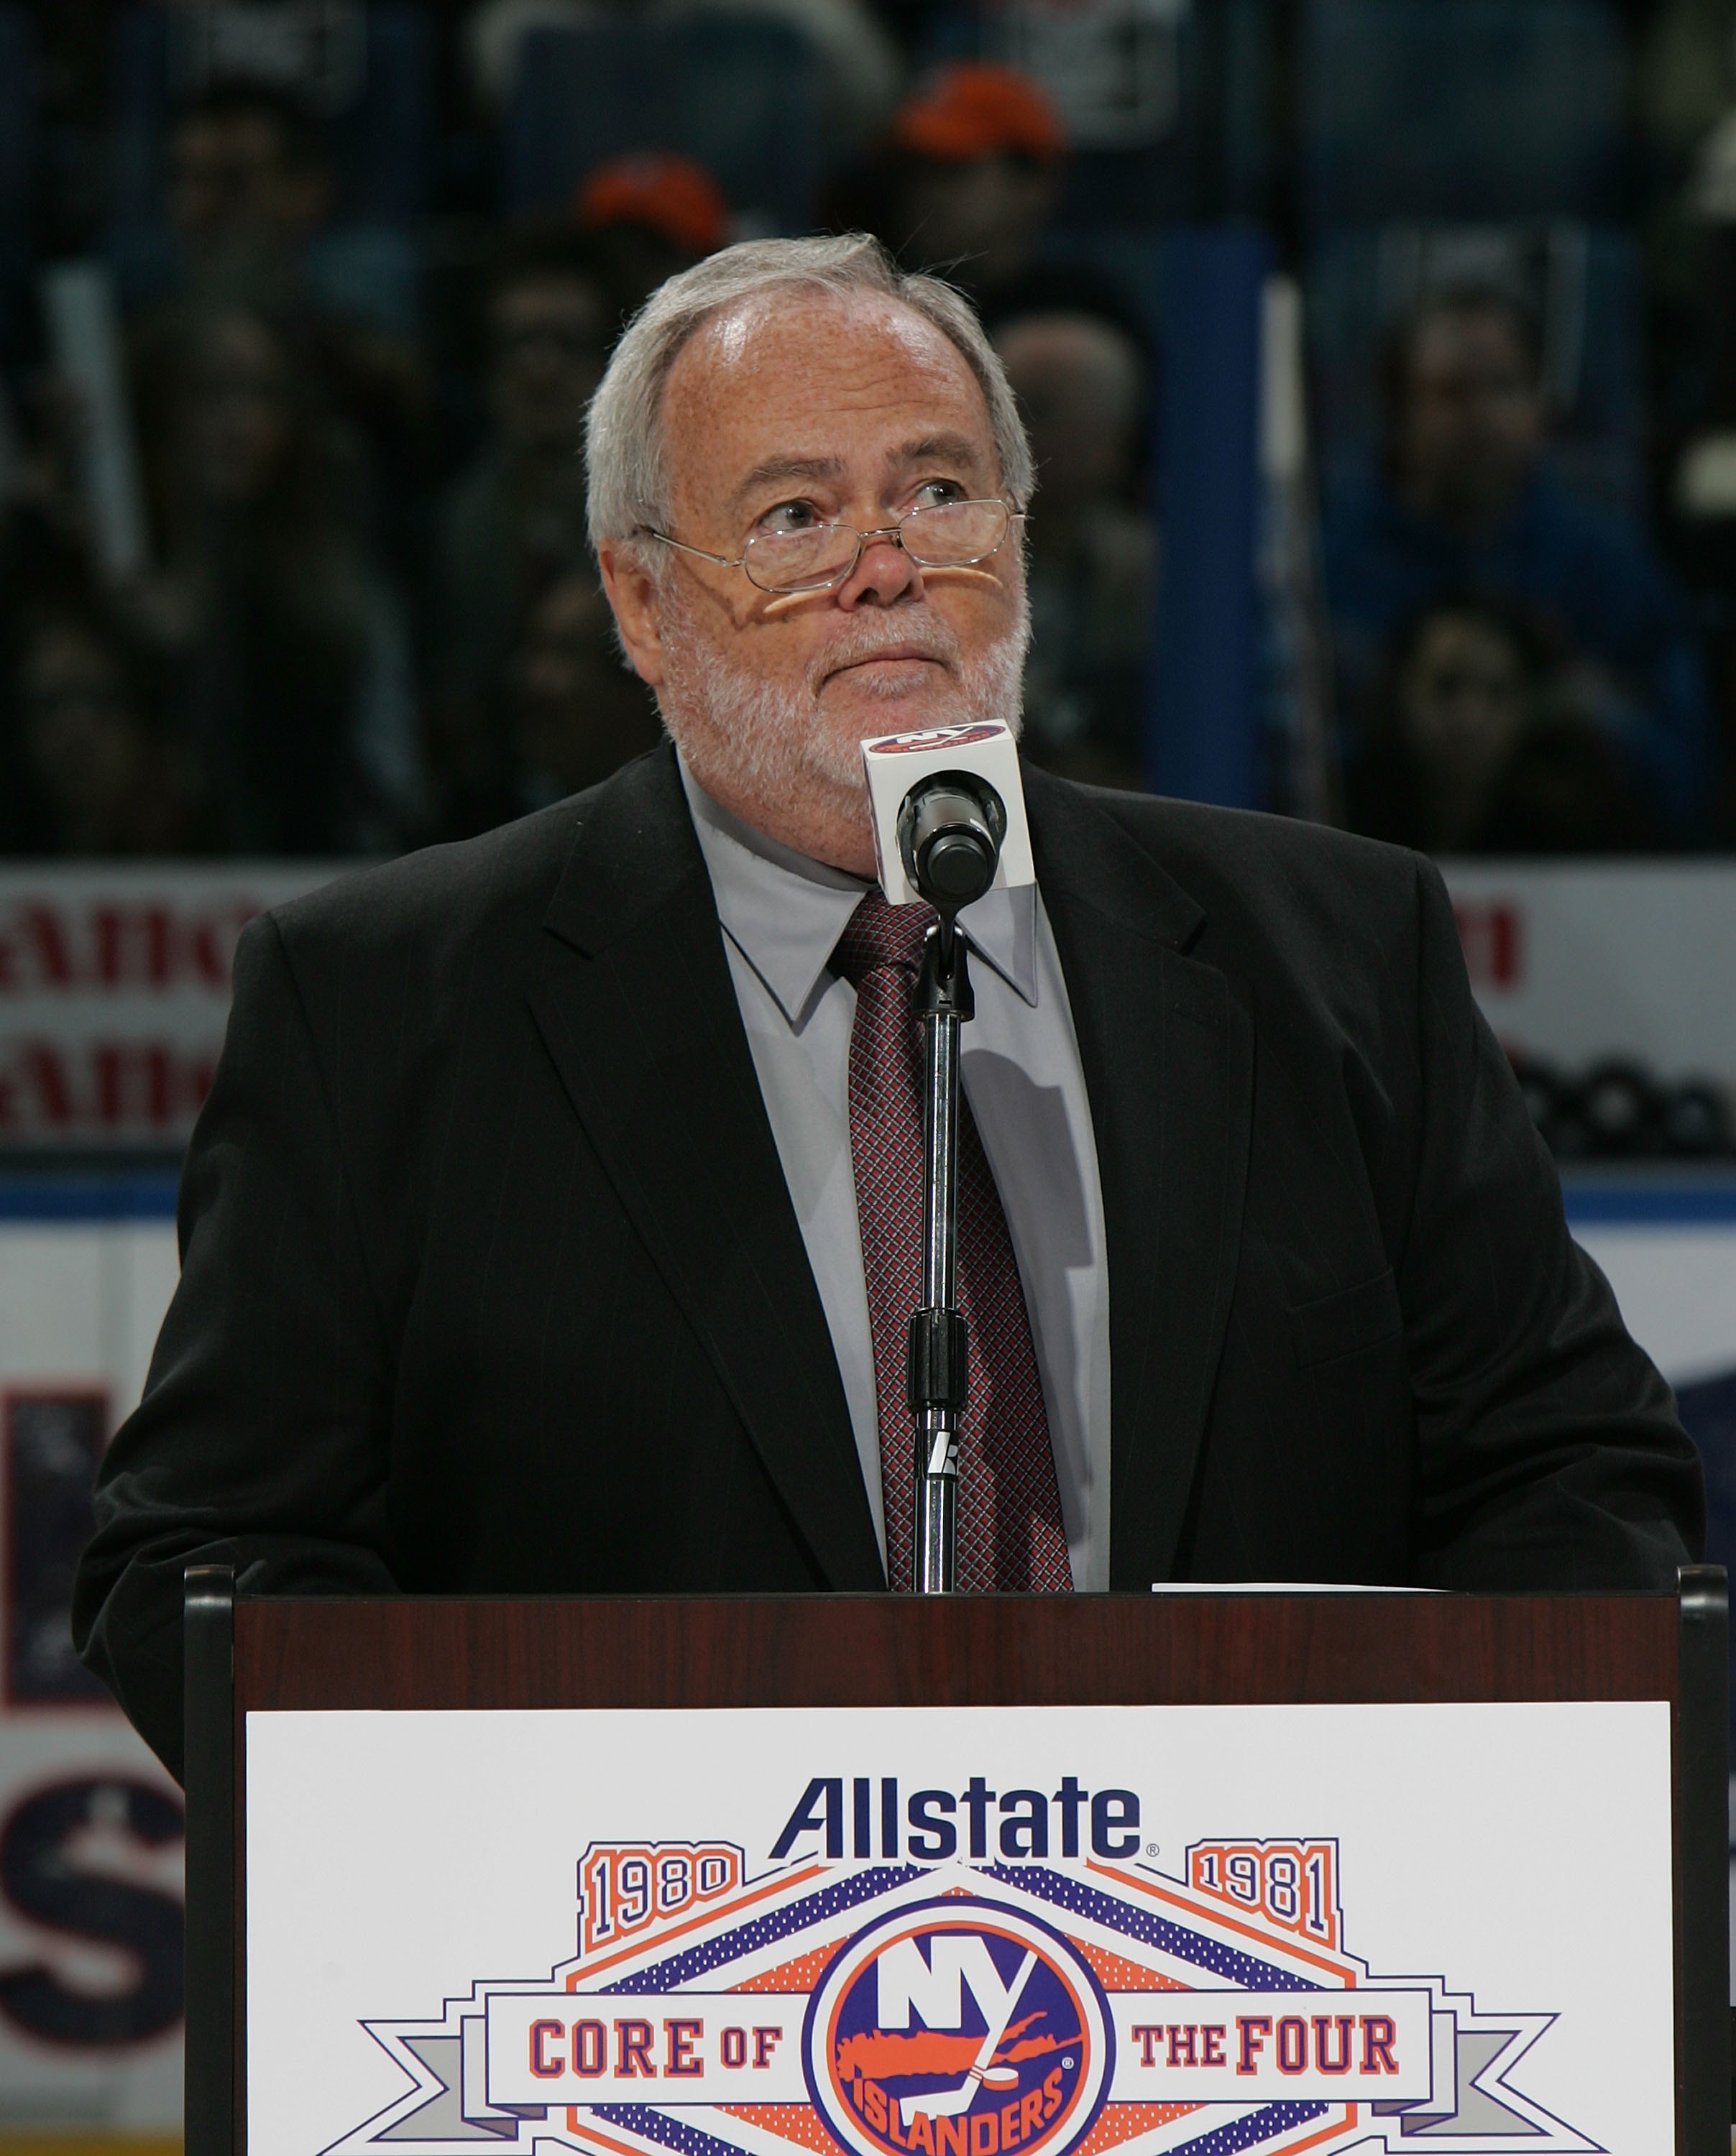 Hall of Fame broadcaster Jiggs McDonald  handles the commentary for the "Core of the Four" Islanders Stanley Cup championship celebration on March 2, 2008.  (Photo by Bruce Bennett/Getty Images)